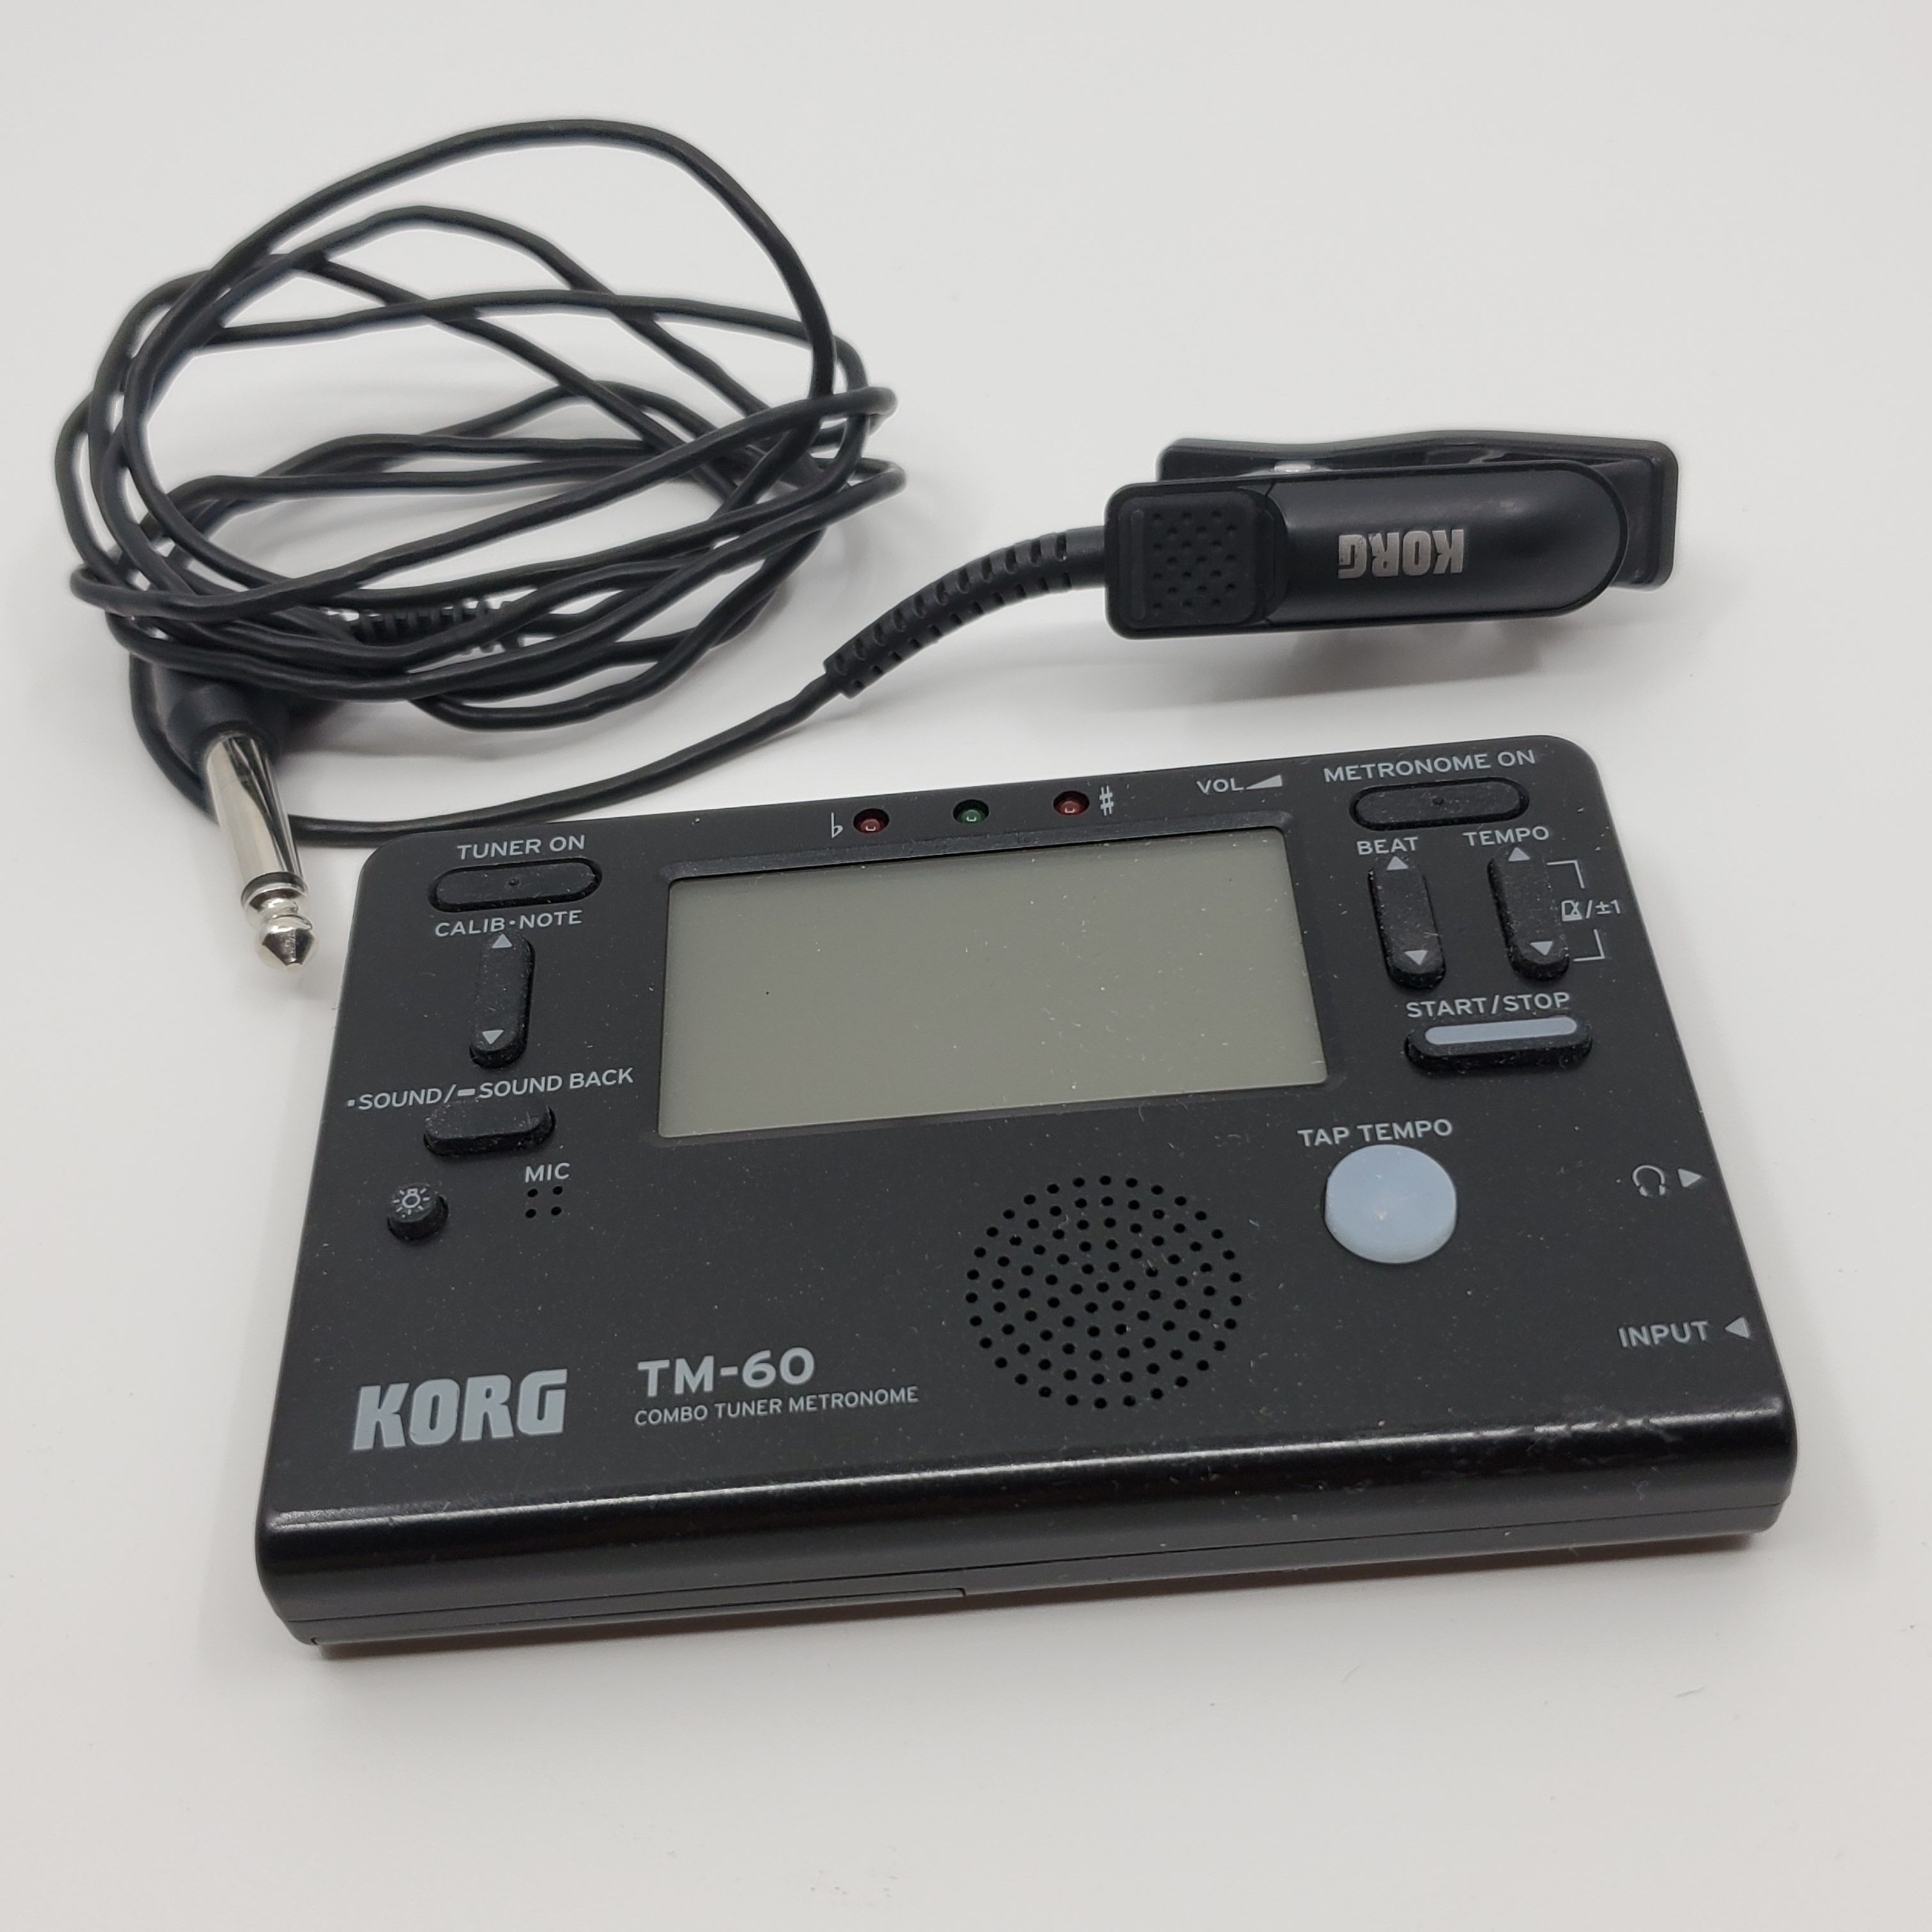 Korg TM 60 Combo Tuner Metronome Black. Pre-owned, in good working and cosmetic shape